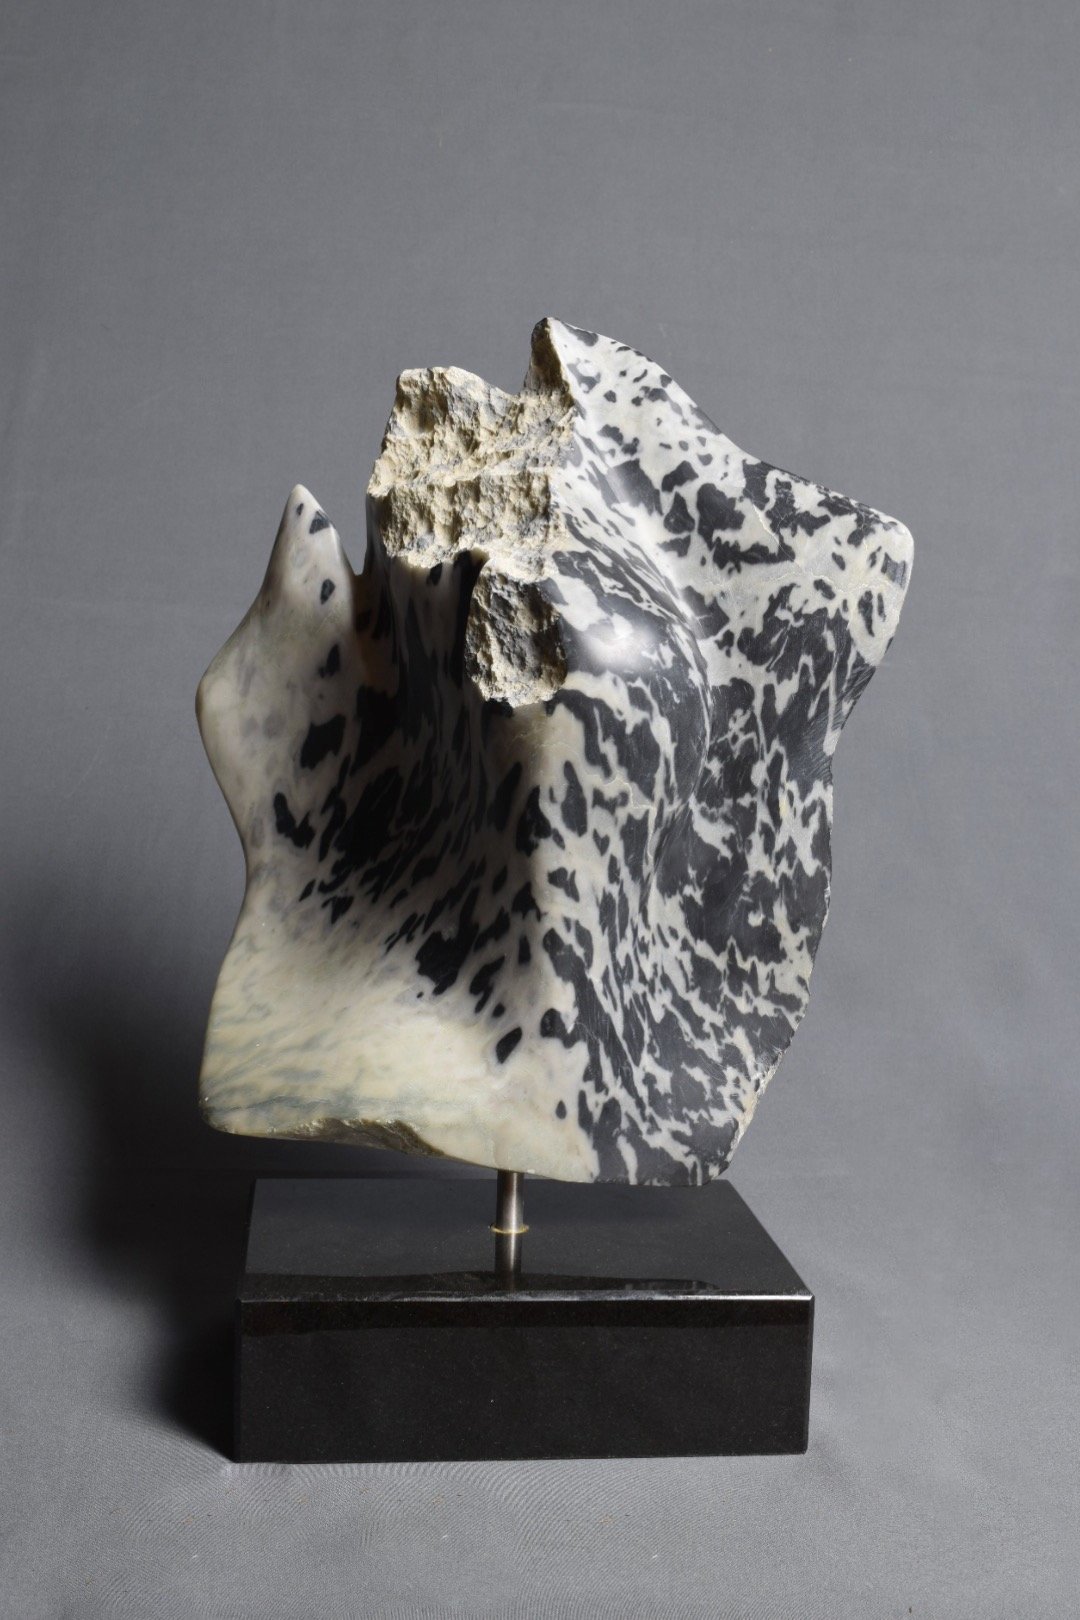 Connect the Dots, Leopard Marble 2018, 11x8x15in